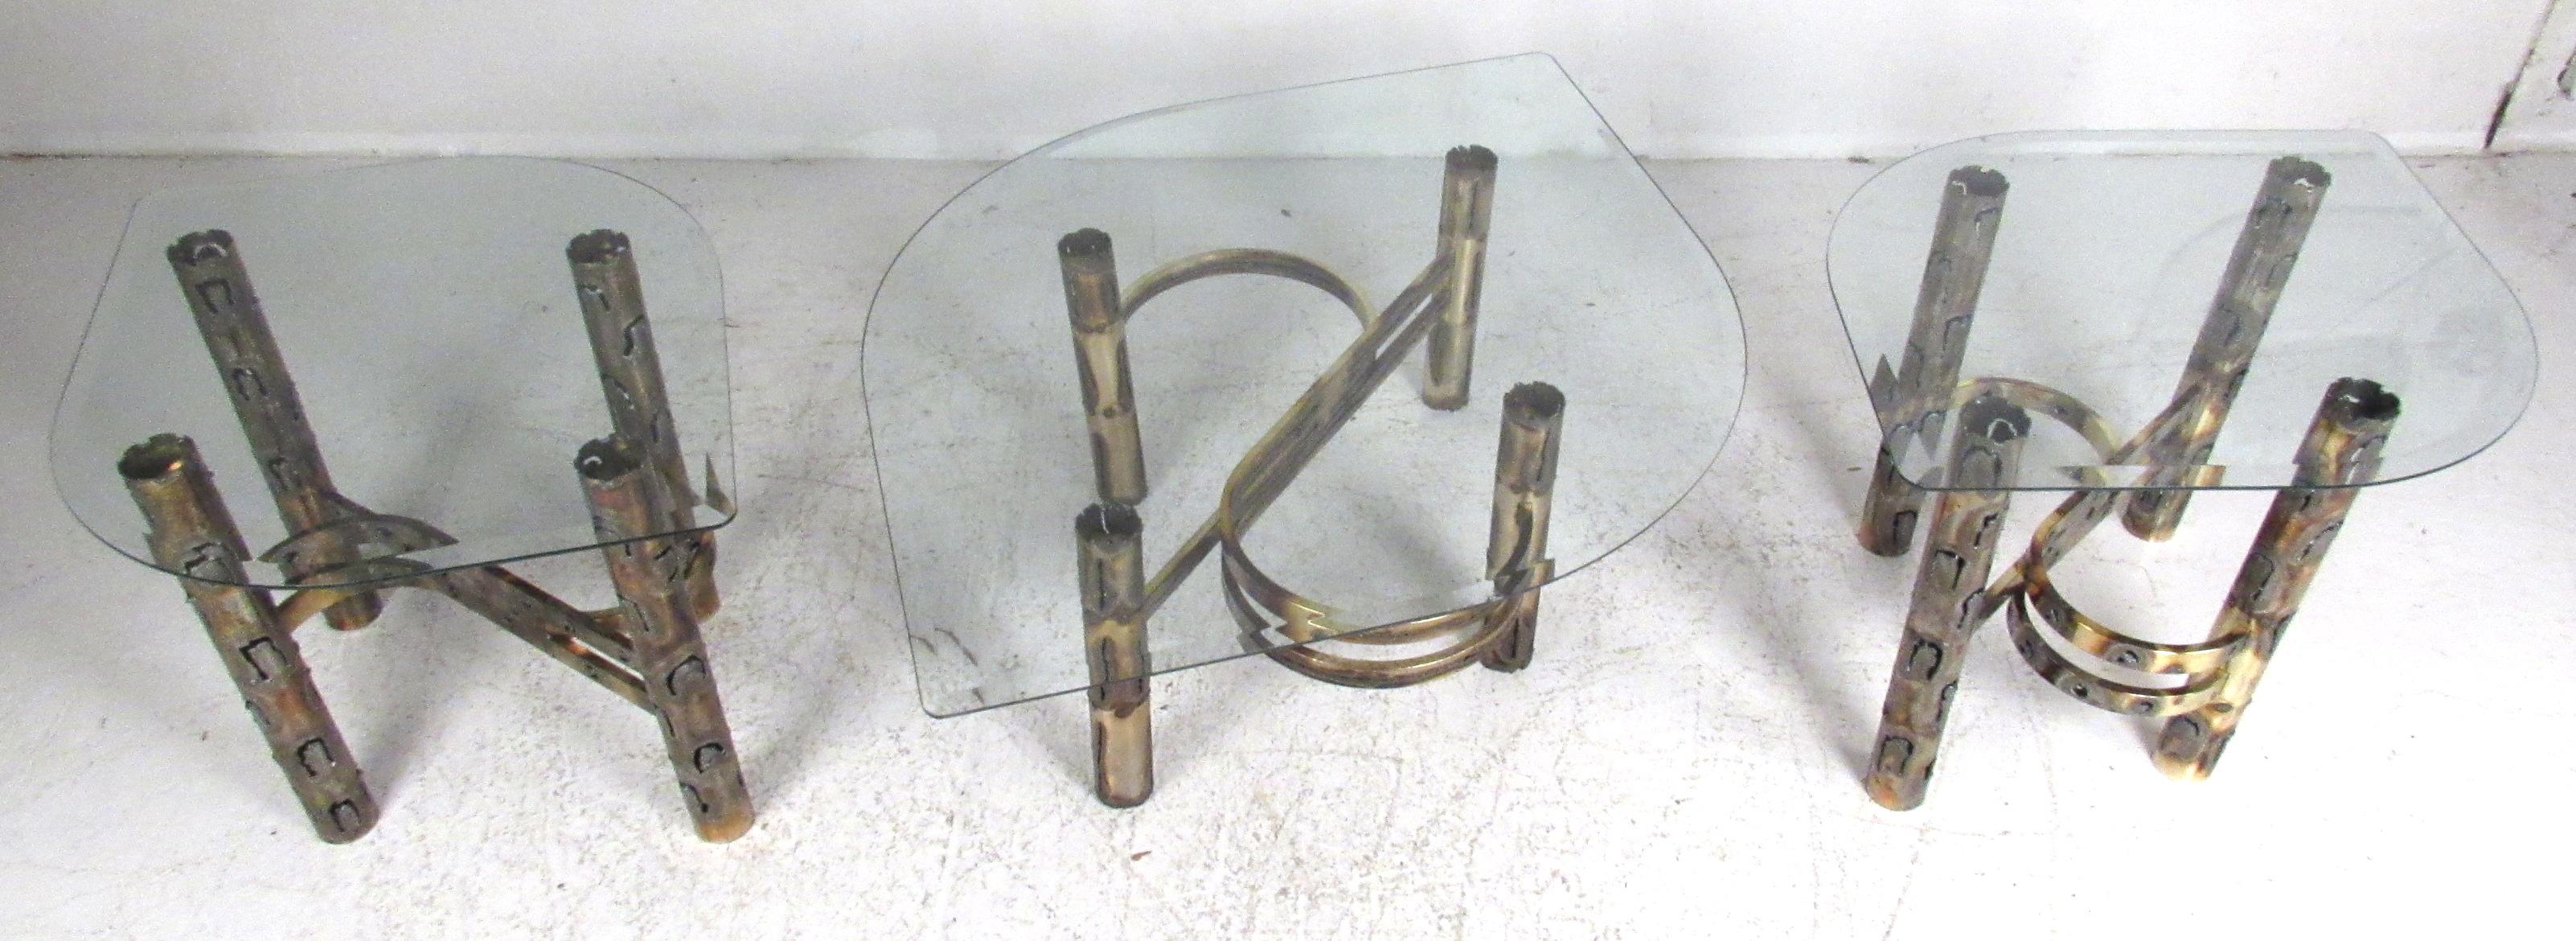 Three piece matching end table or coffee table set with Brutalist style torch cut bases and beveled glass tops. Please confirm item location (NY or NJ).